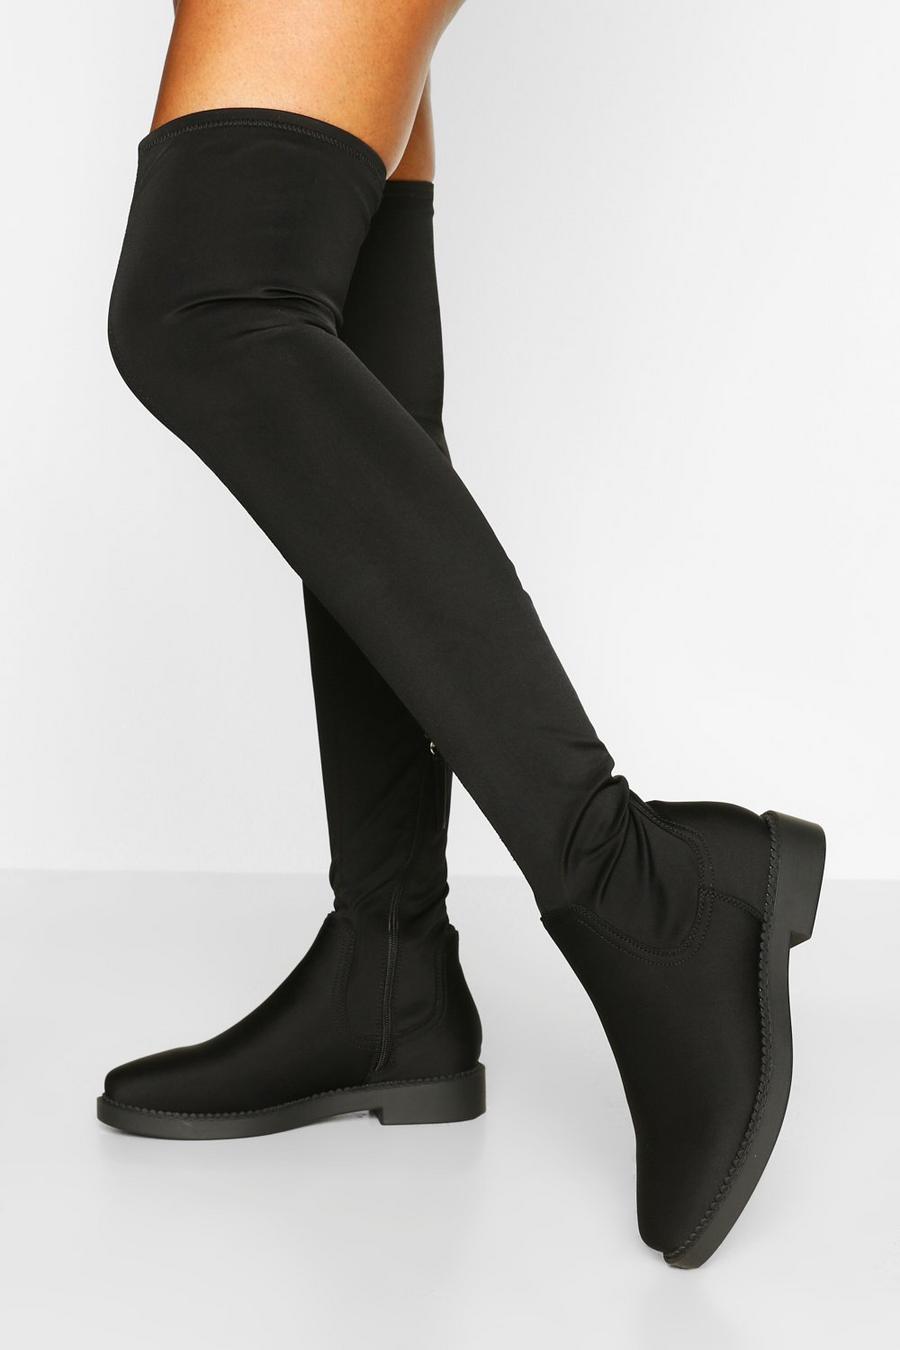 Black negro Flat Stretch Over The Knee Boots